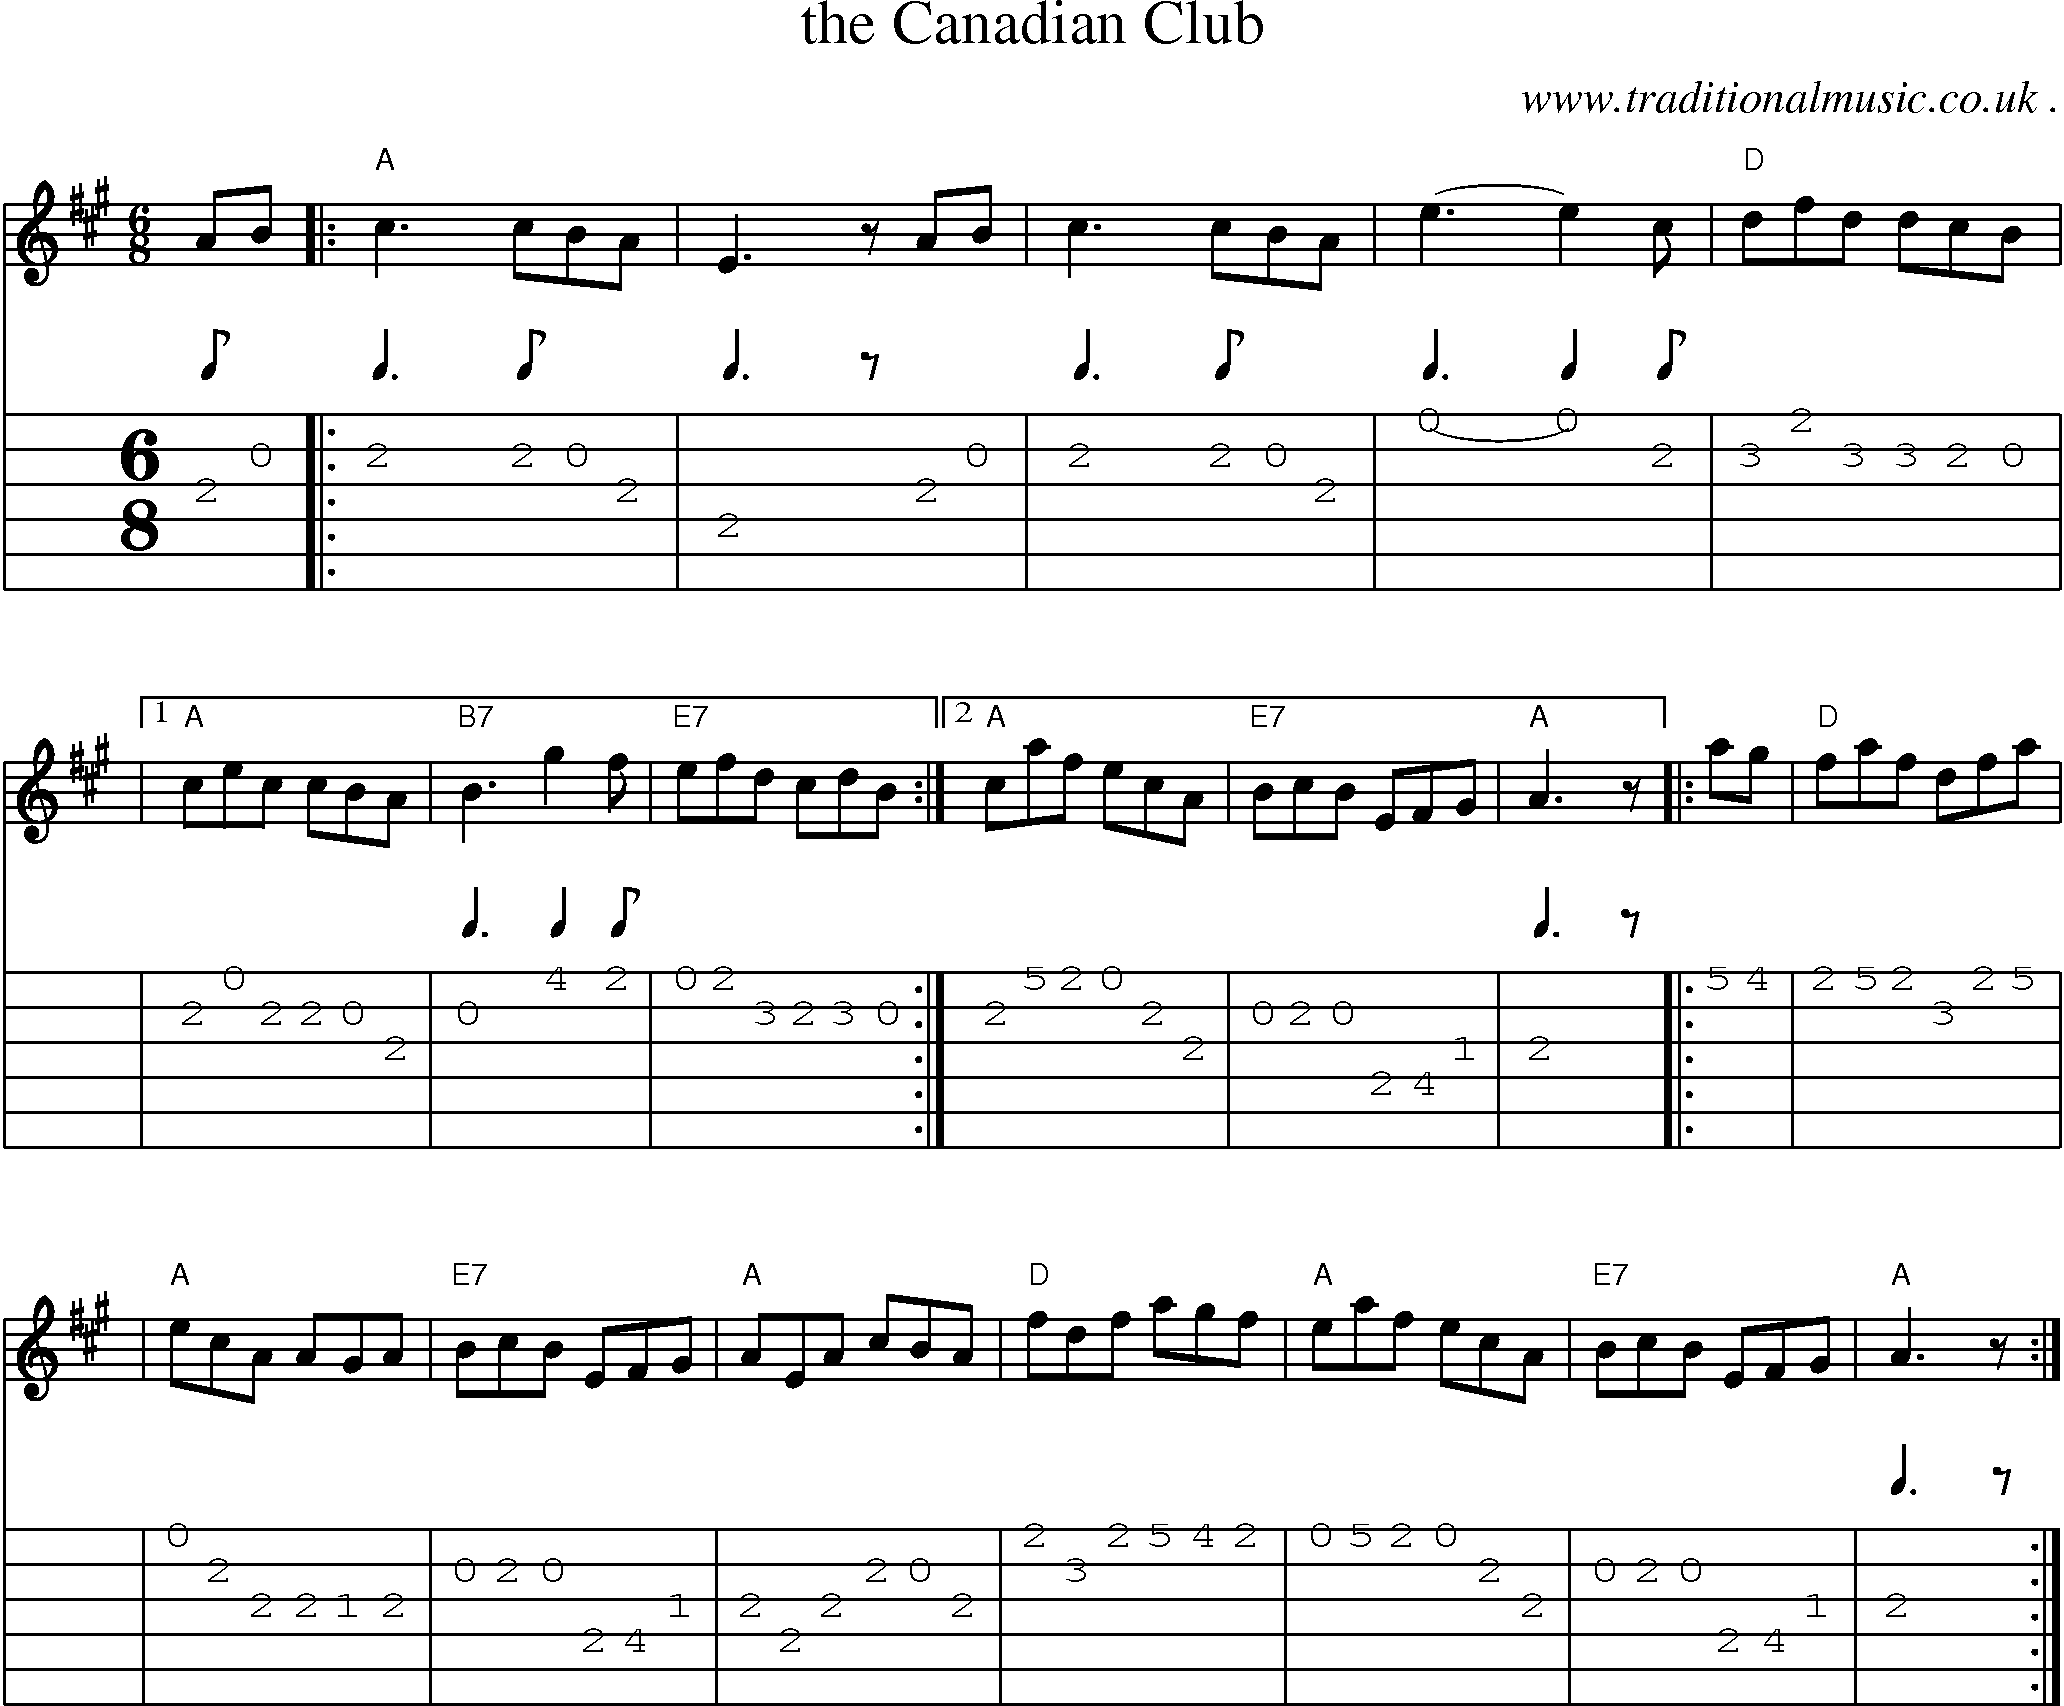 Sheet-music  score, Chords and Guitar Tabs for The Canadian Club